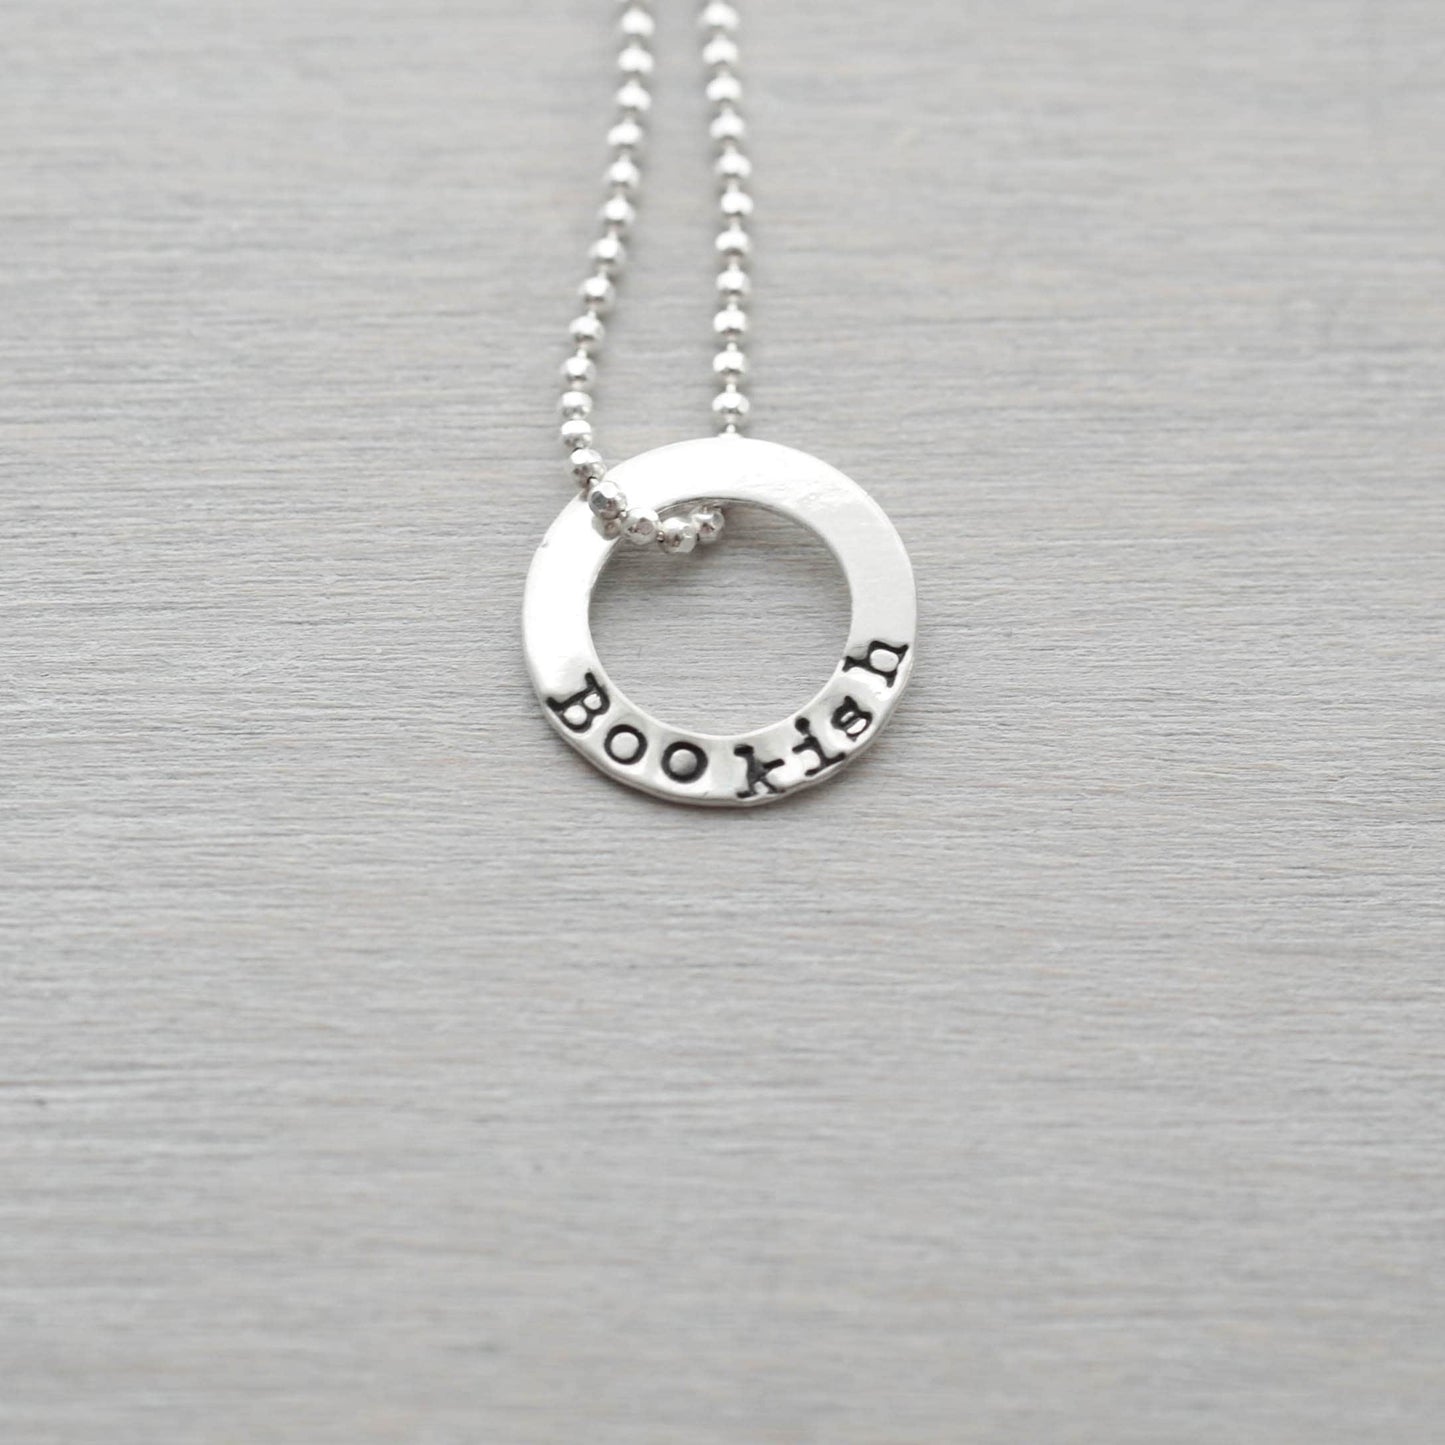 Bookish Sterling Silver Necklace